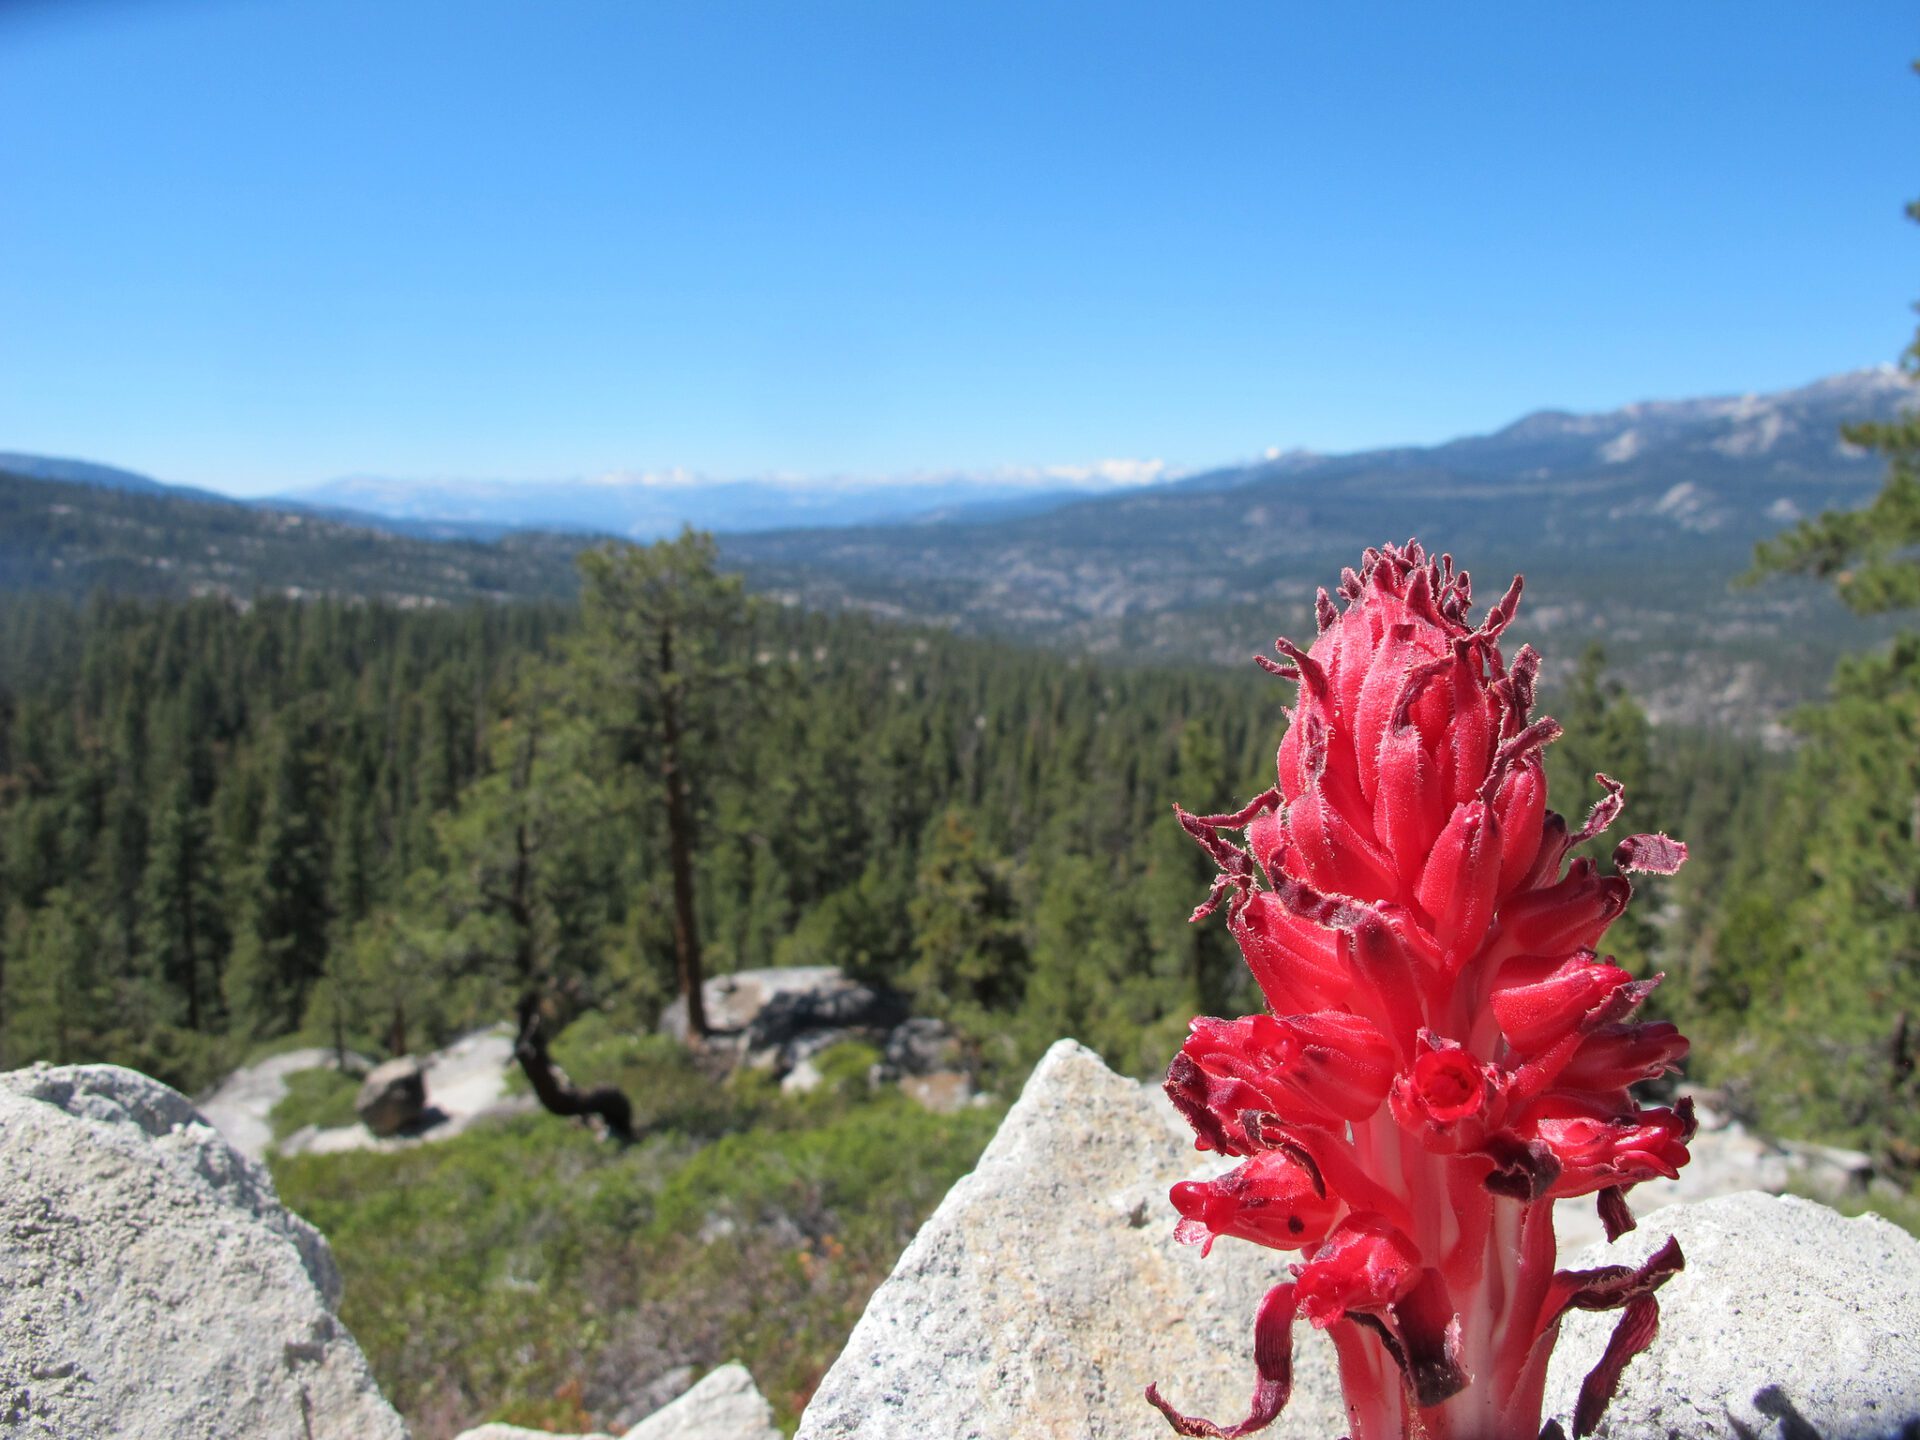 Snow plant in the Sierra